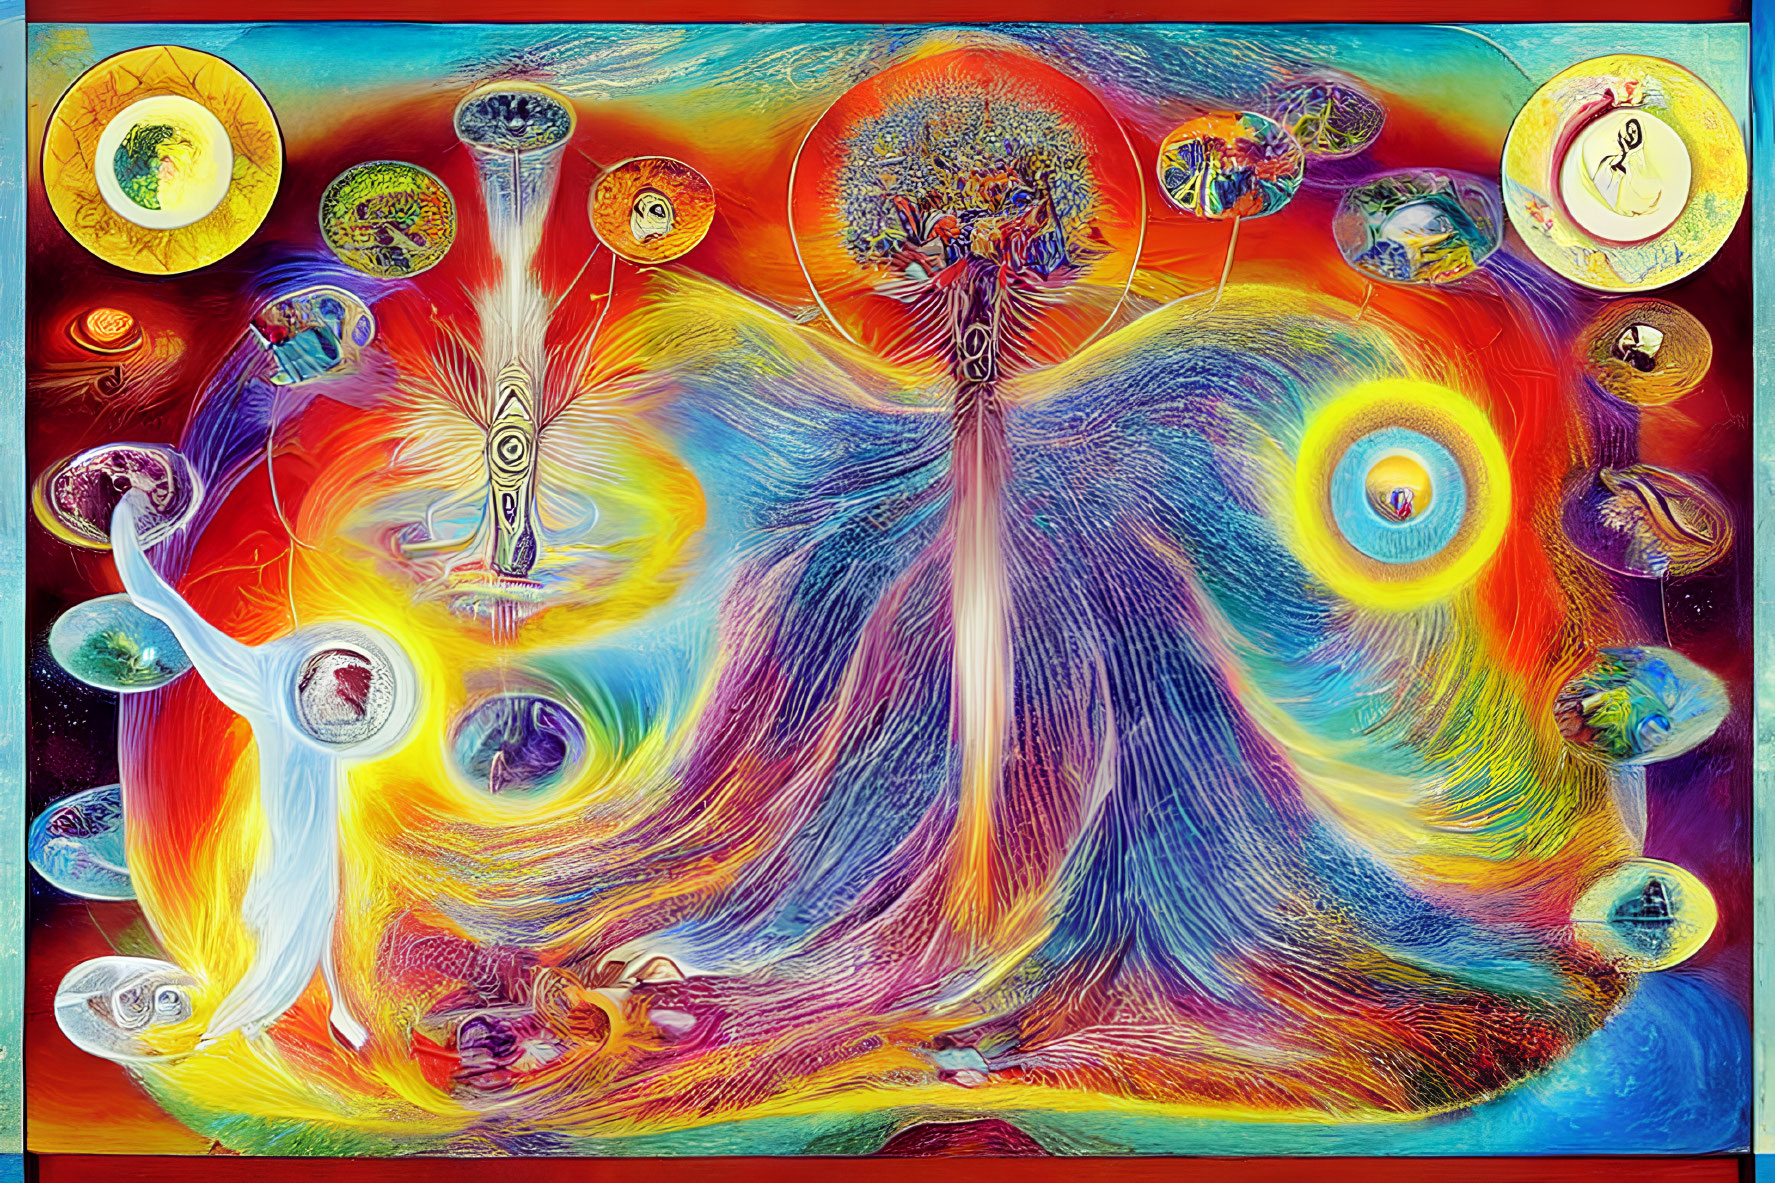 Colorful Psychedelic Painting with Central Figure and Mystical Symbols